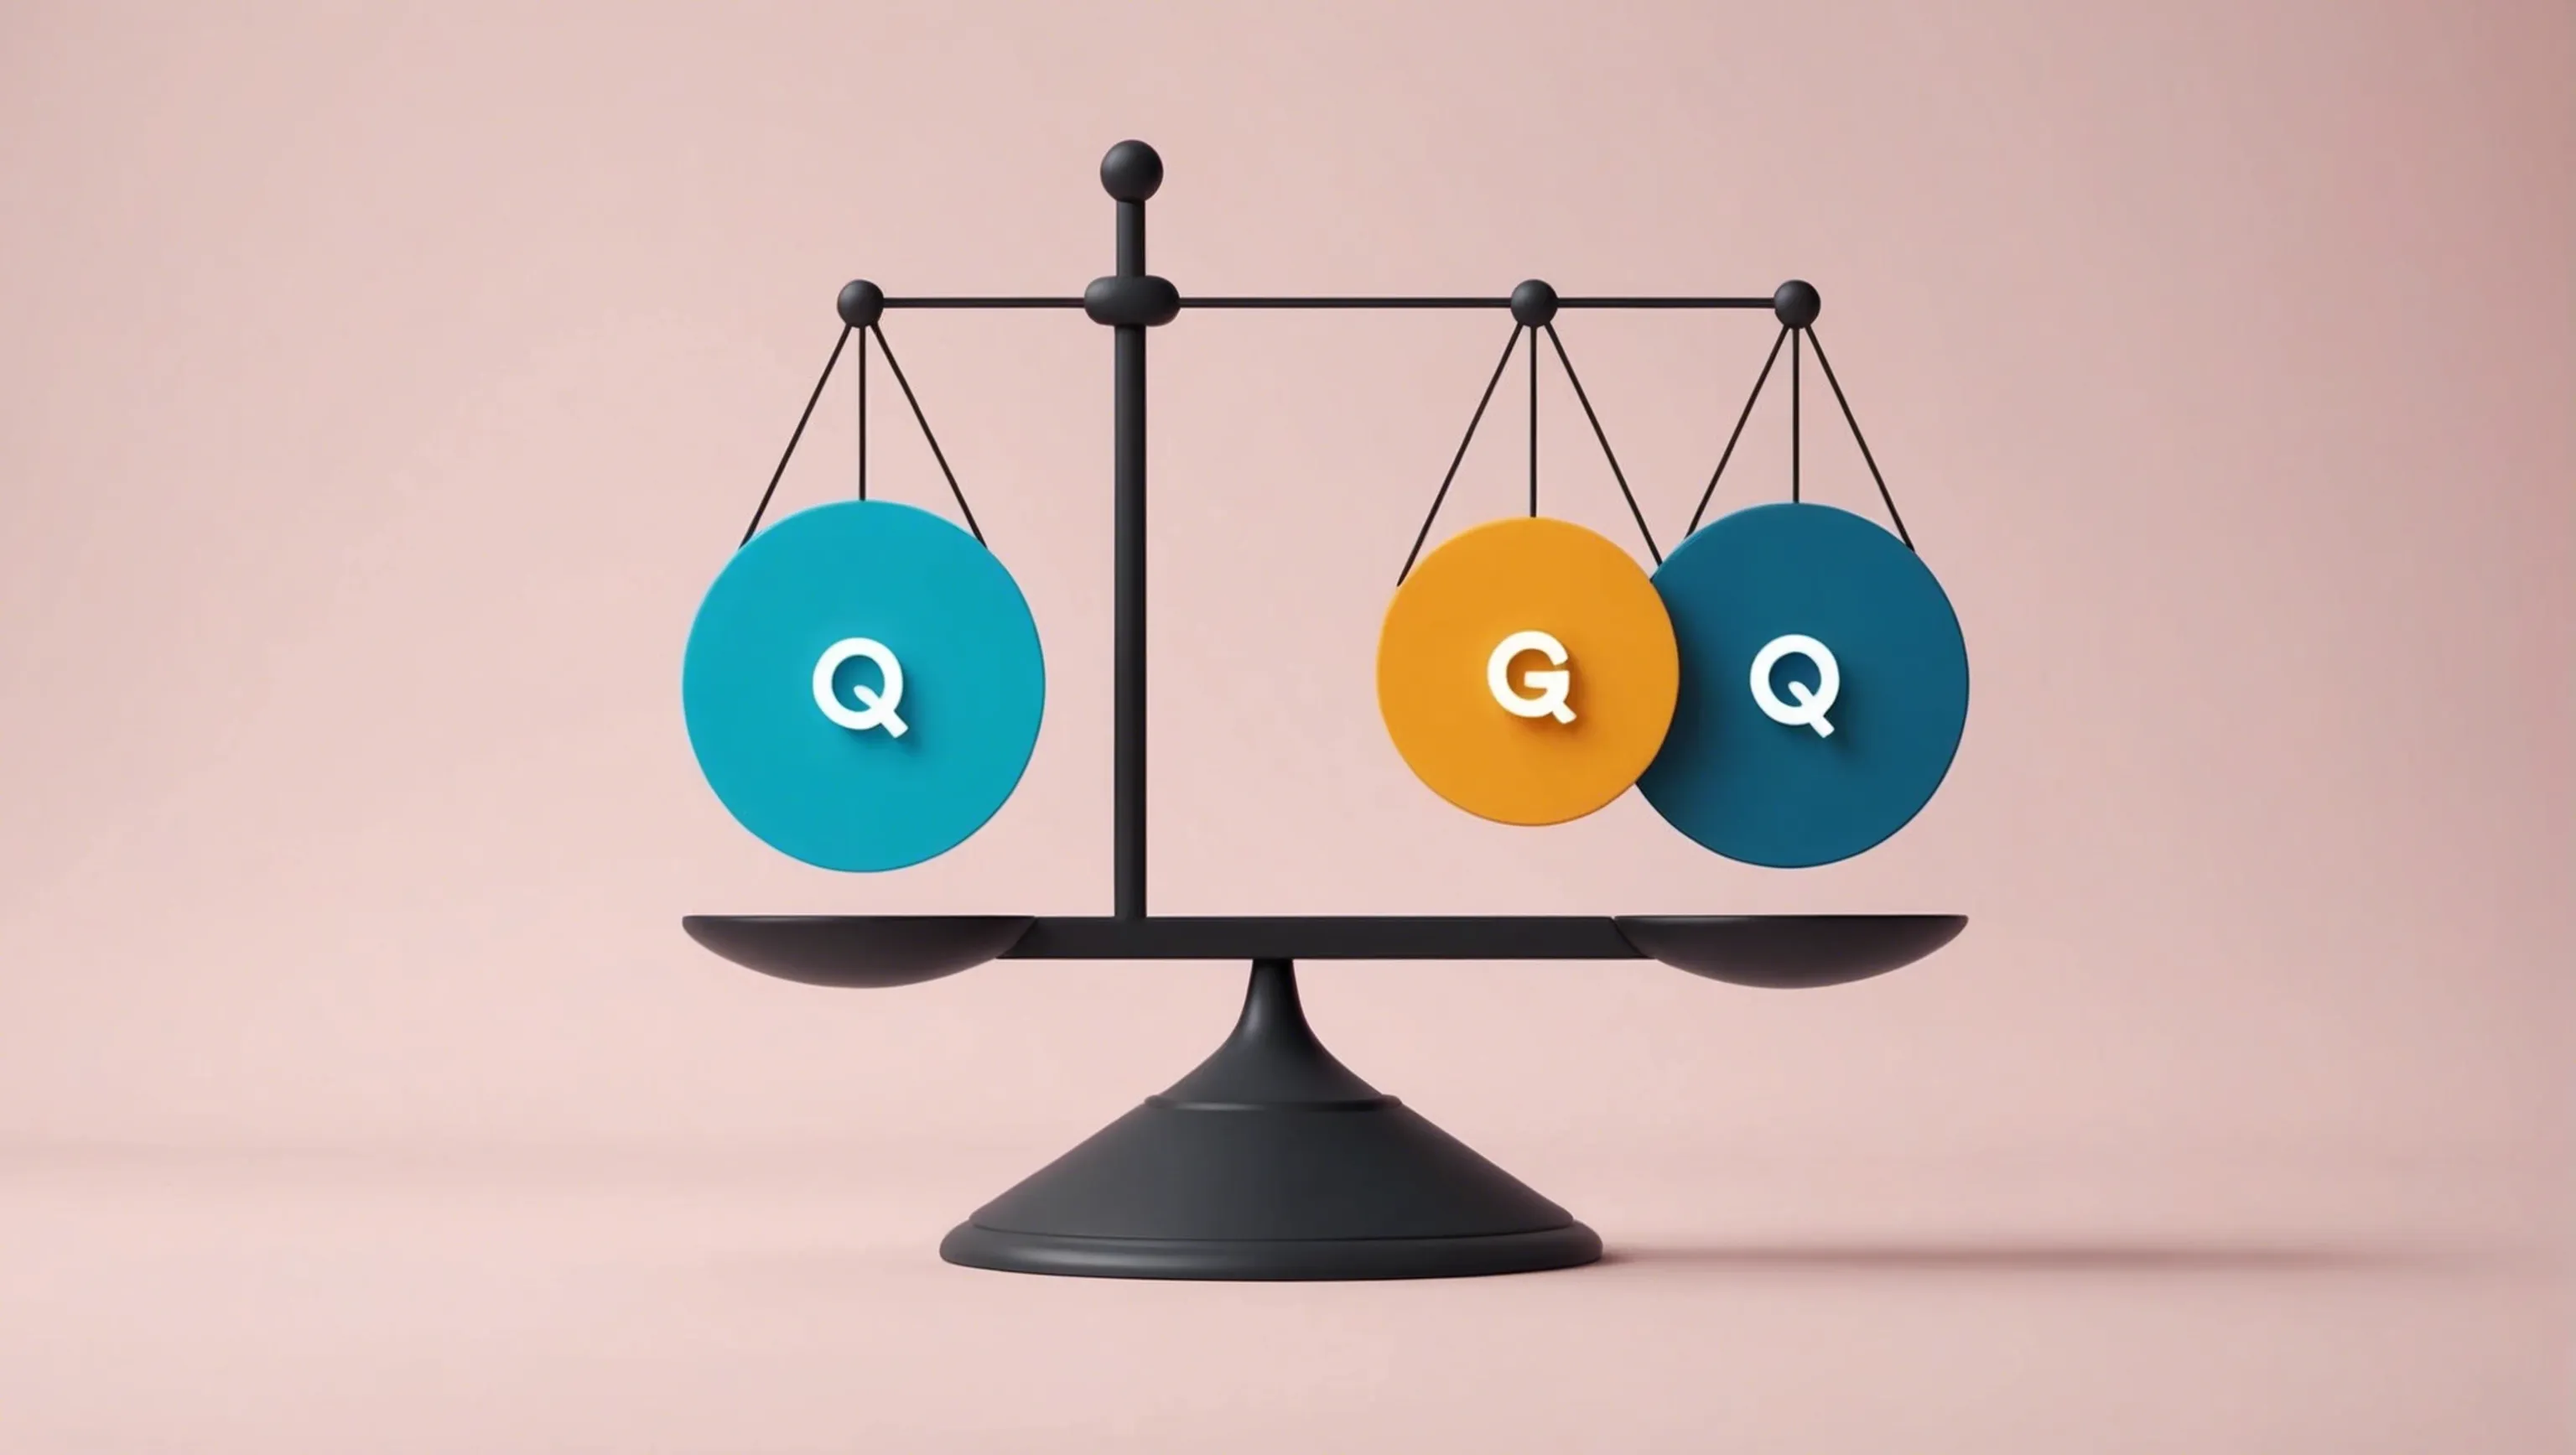 Finding the right balance between quality and quantity in content